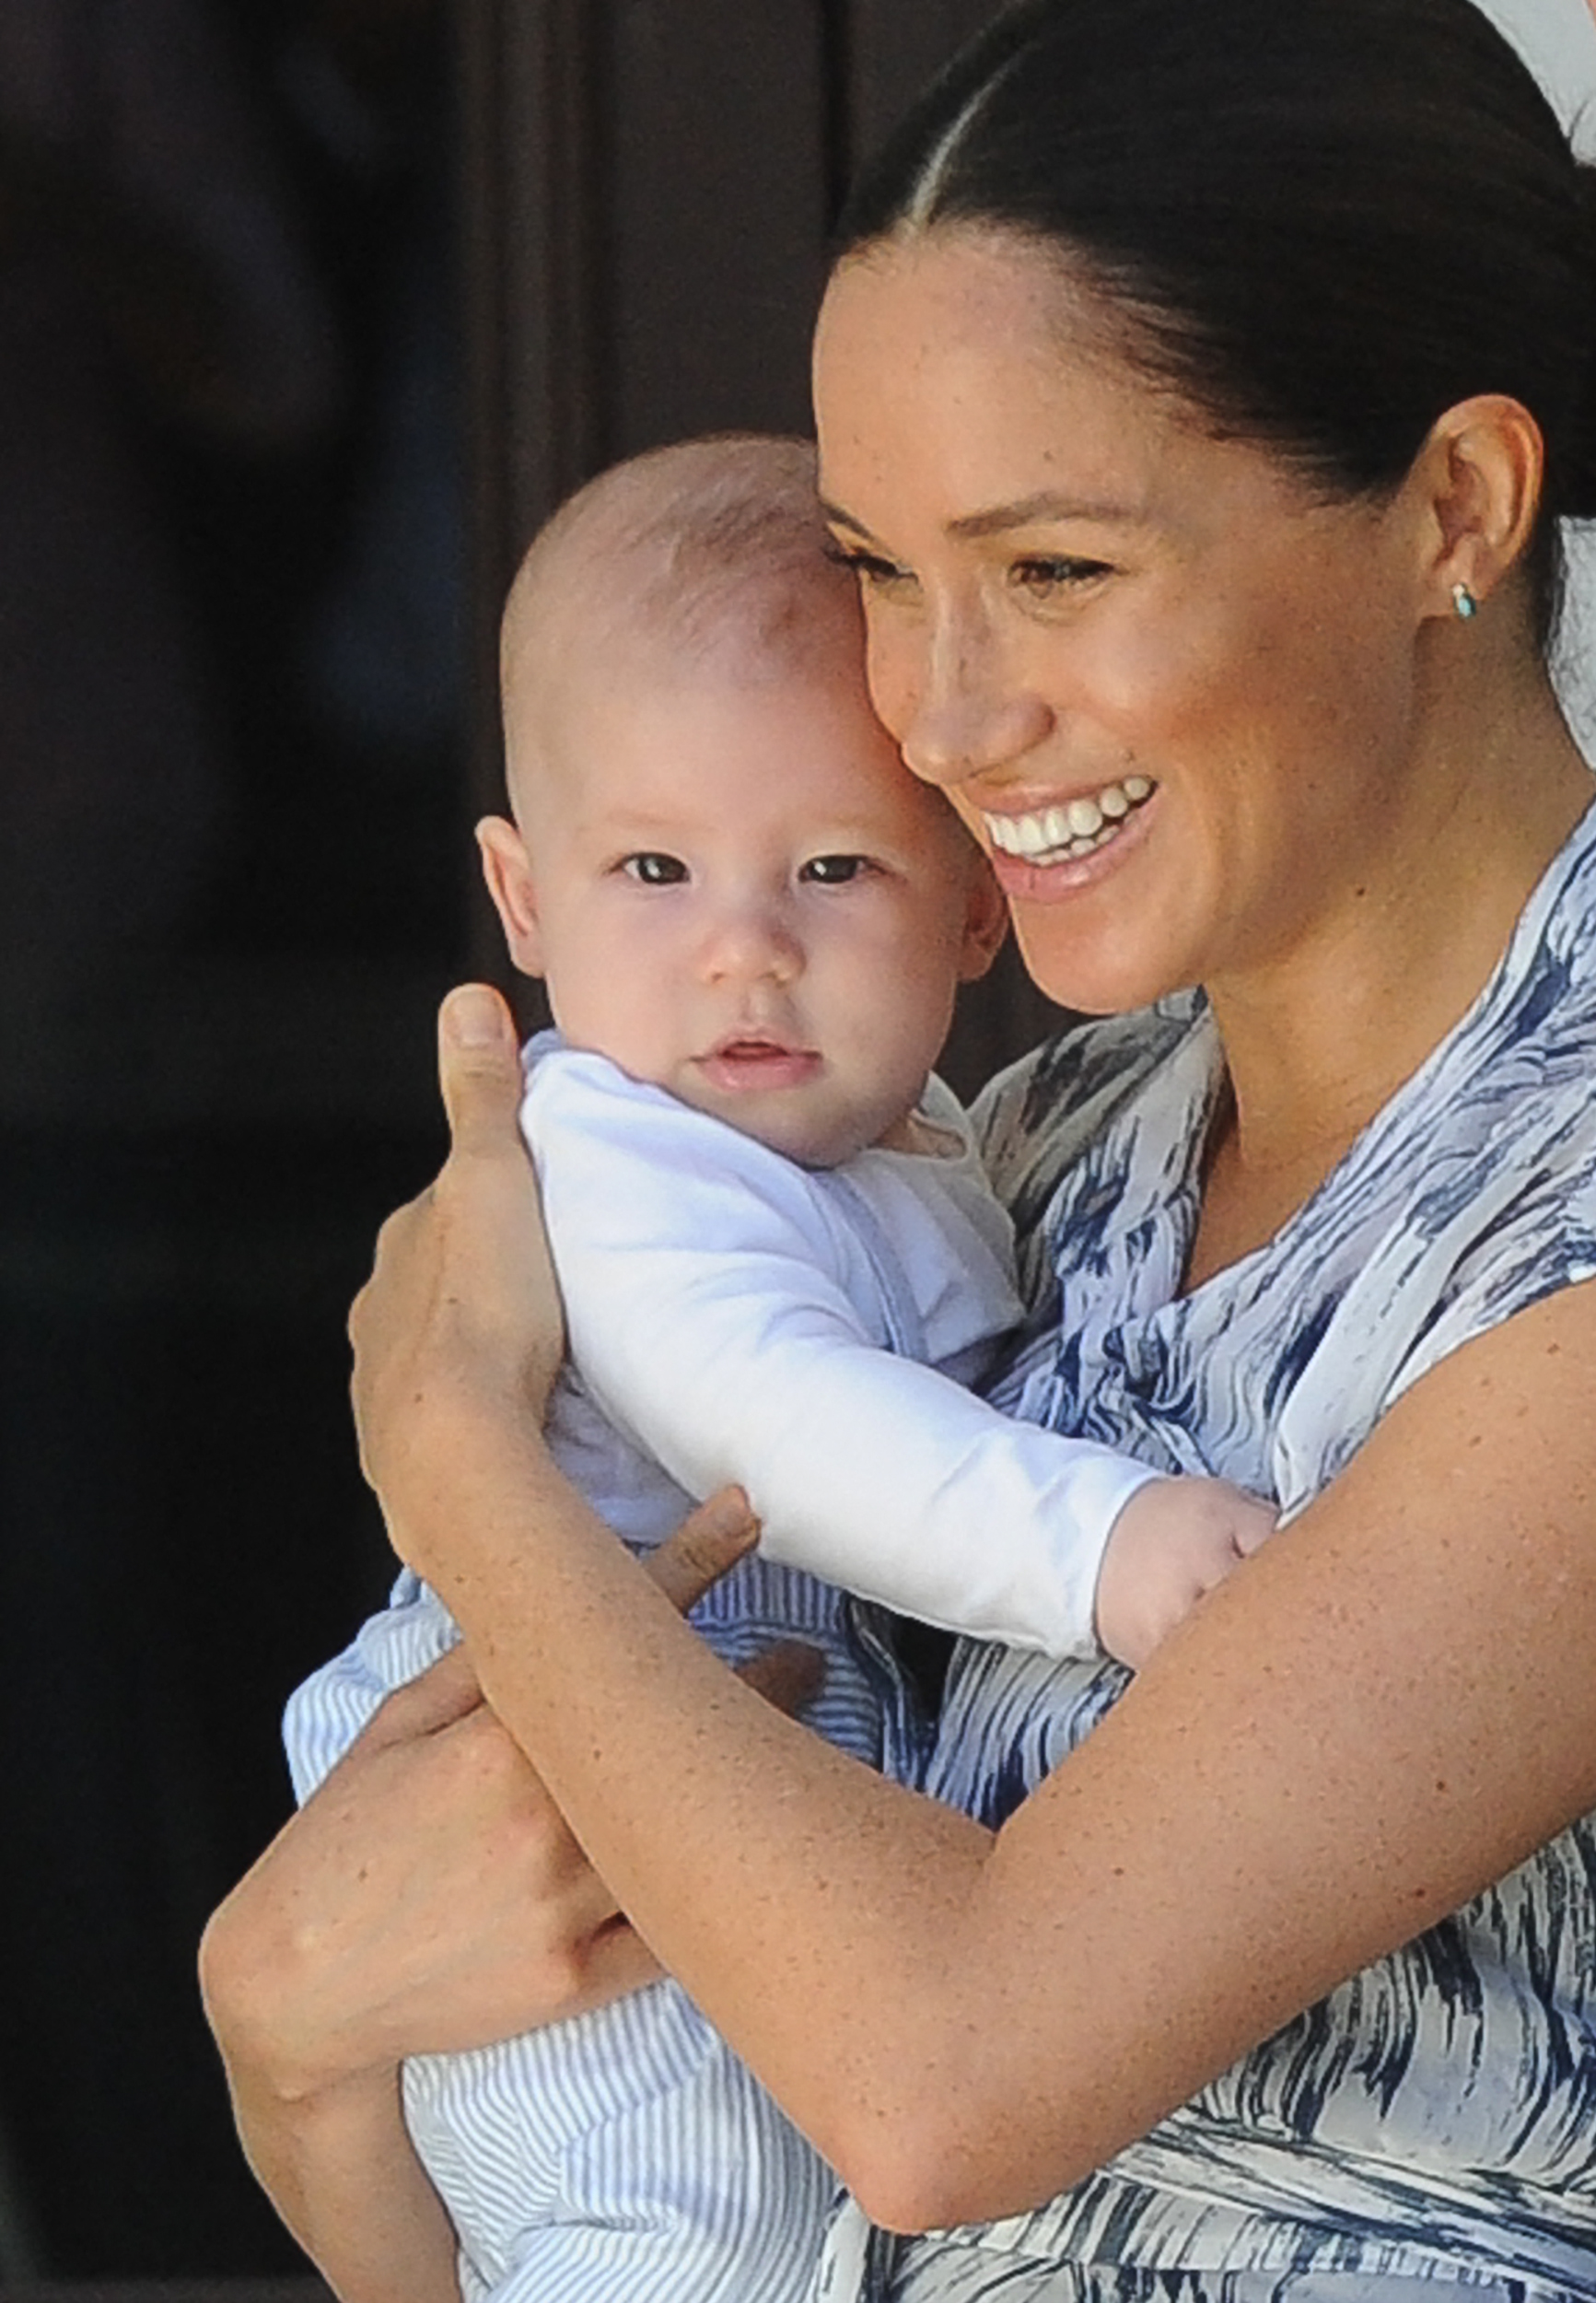 Meghan Markle and her son, Archie, at the Tutu Legacy Foundation in Cape Town on September 25, 2019 | Source: Getty Images